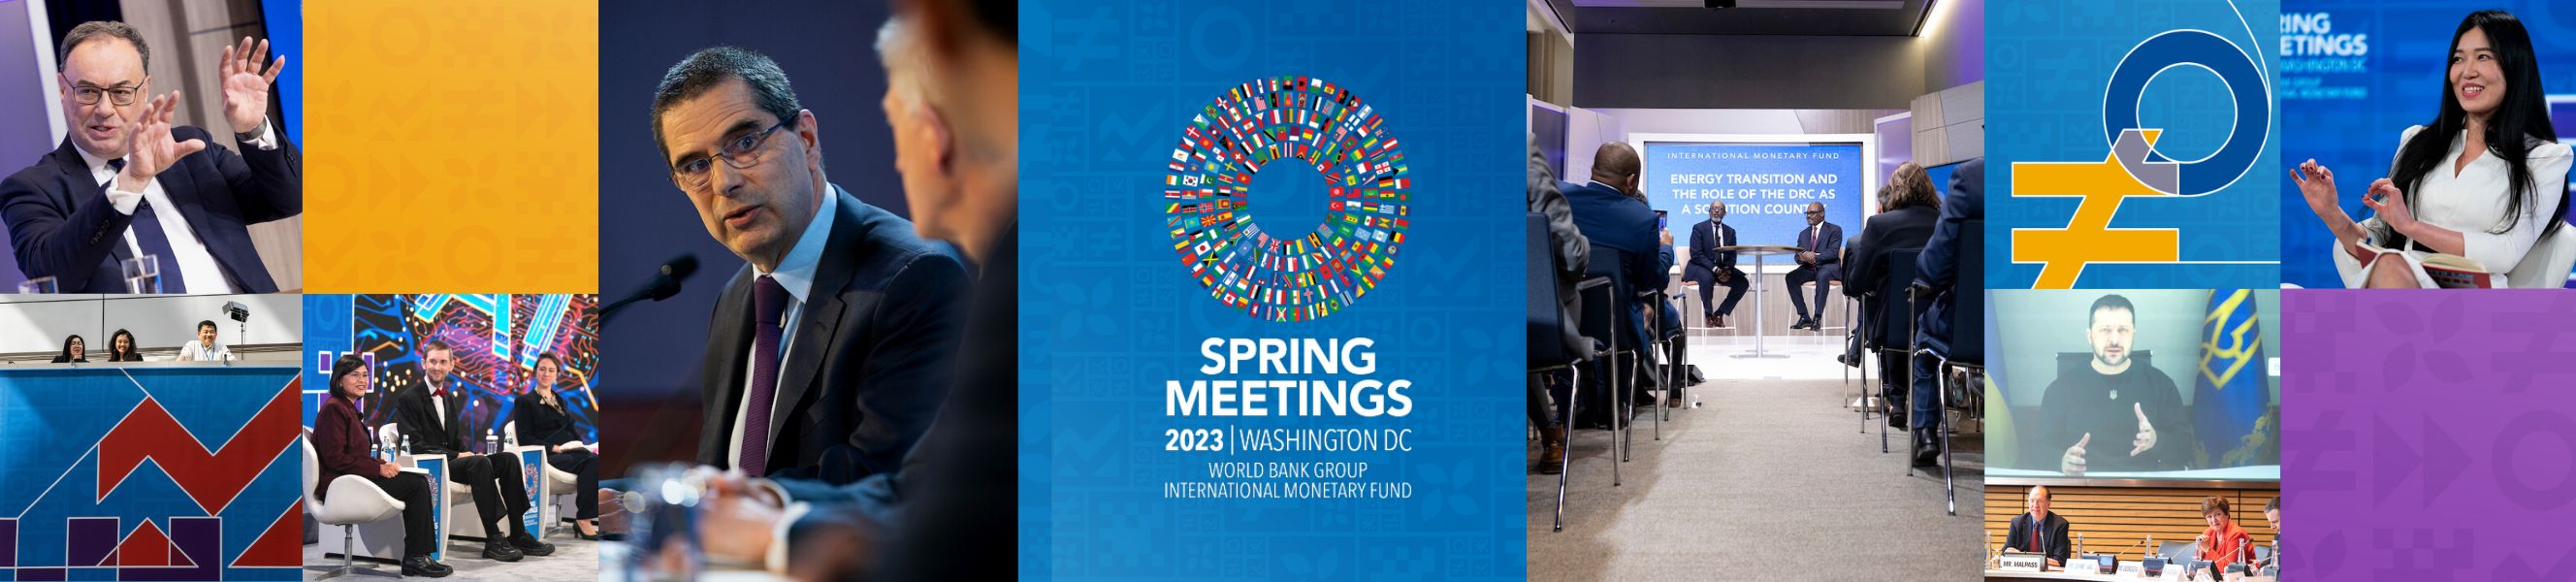 Day 3 of the IMF Spring Meeting 2023